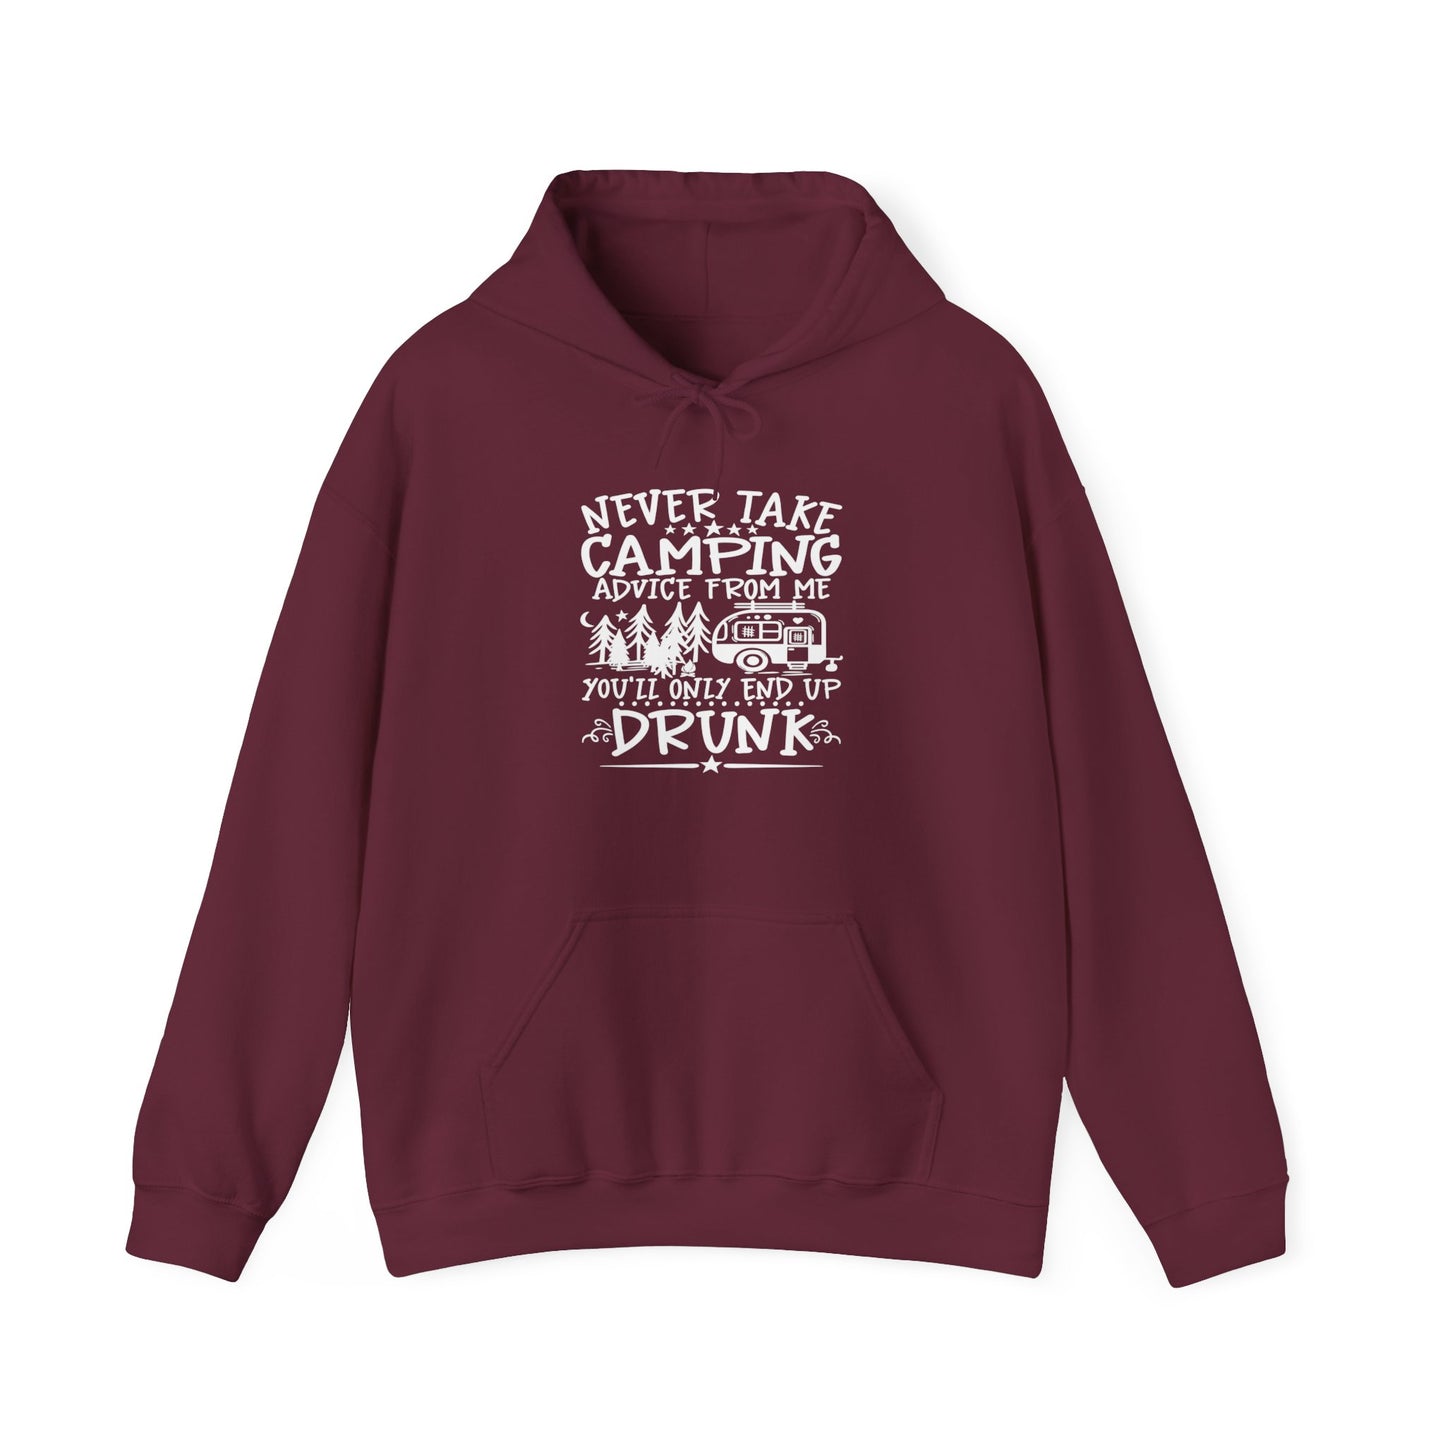 Never Take Camping Advice From Me You'll Only End Up Drunk in White - Hooded Sweatshirt S-5XL